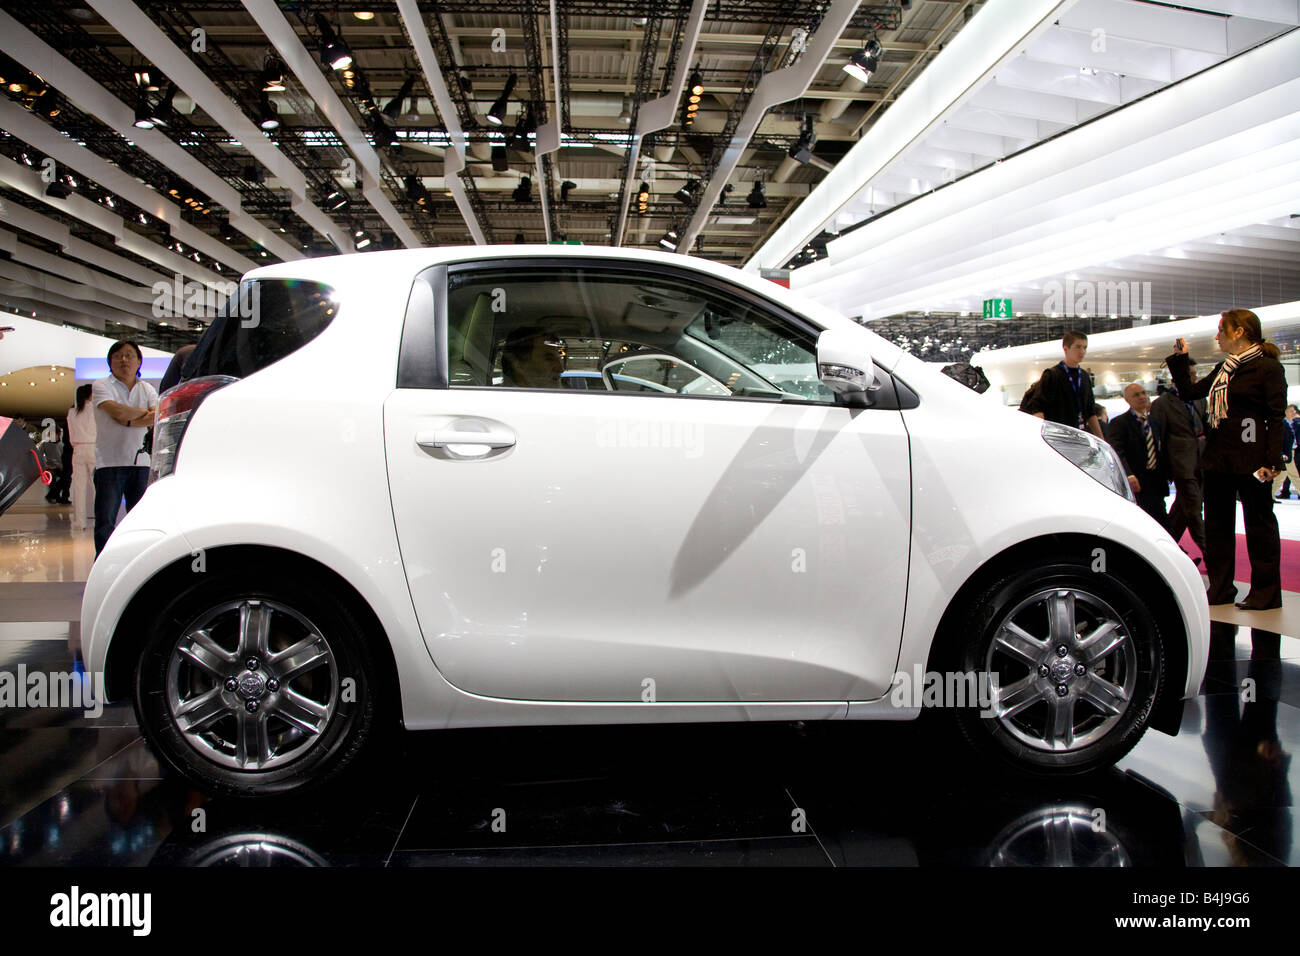 Toyota IQ. On show at a Motor Show 2008. The Mondial de l'Automobile. Stock Photo